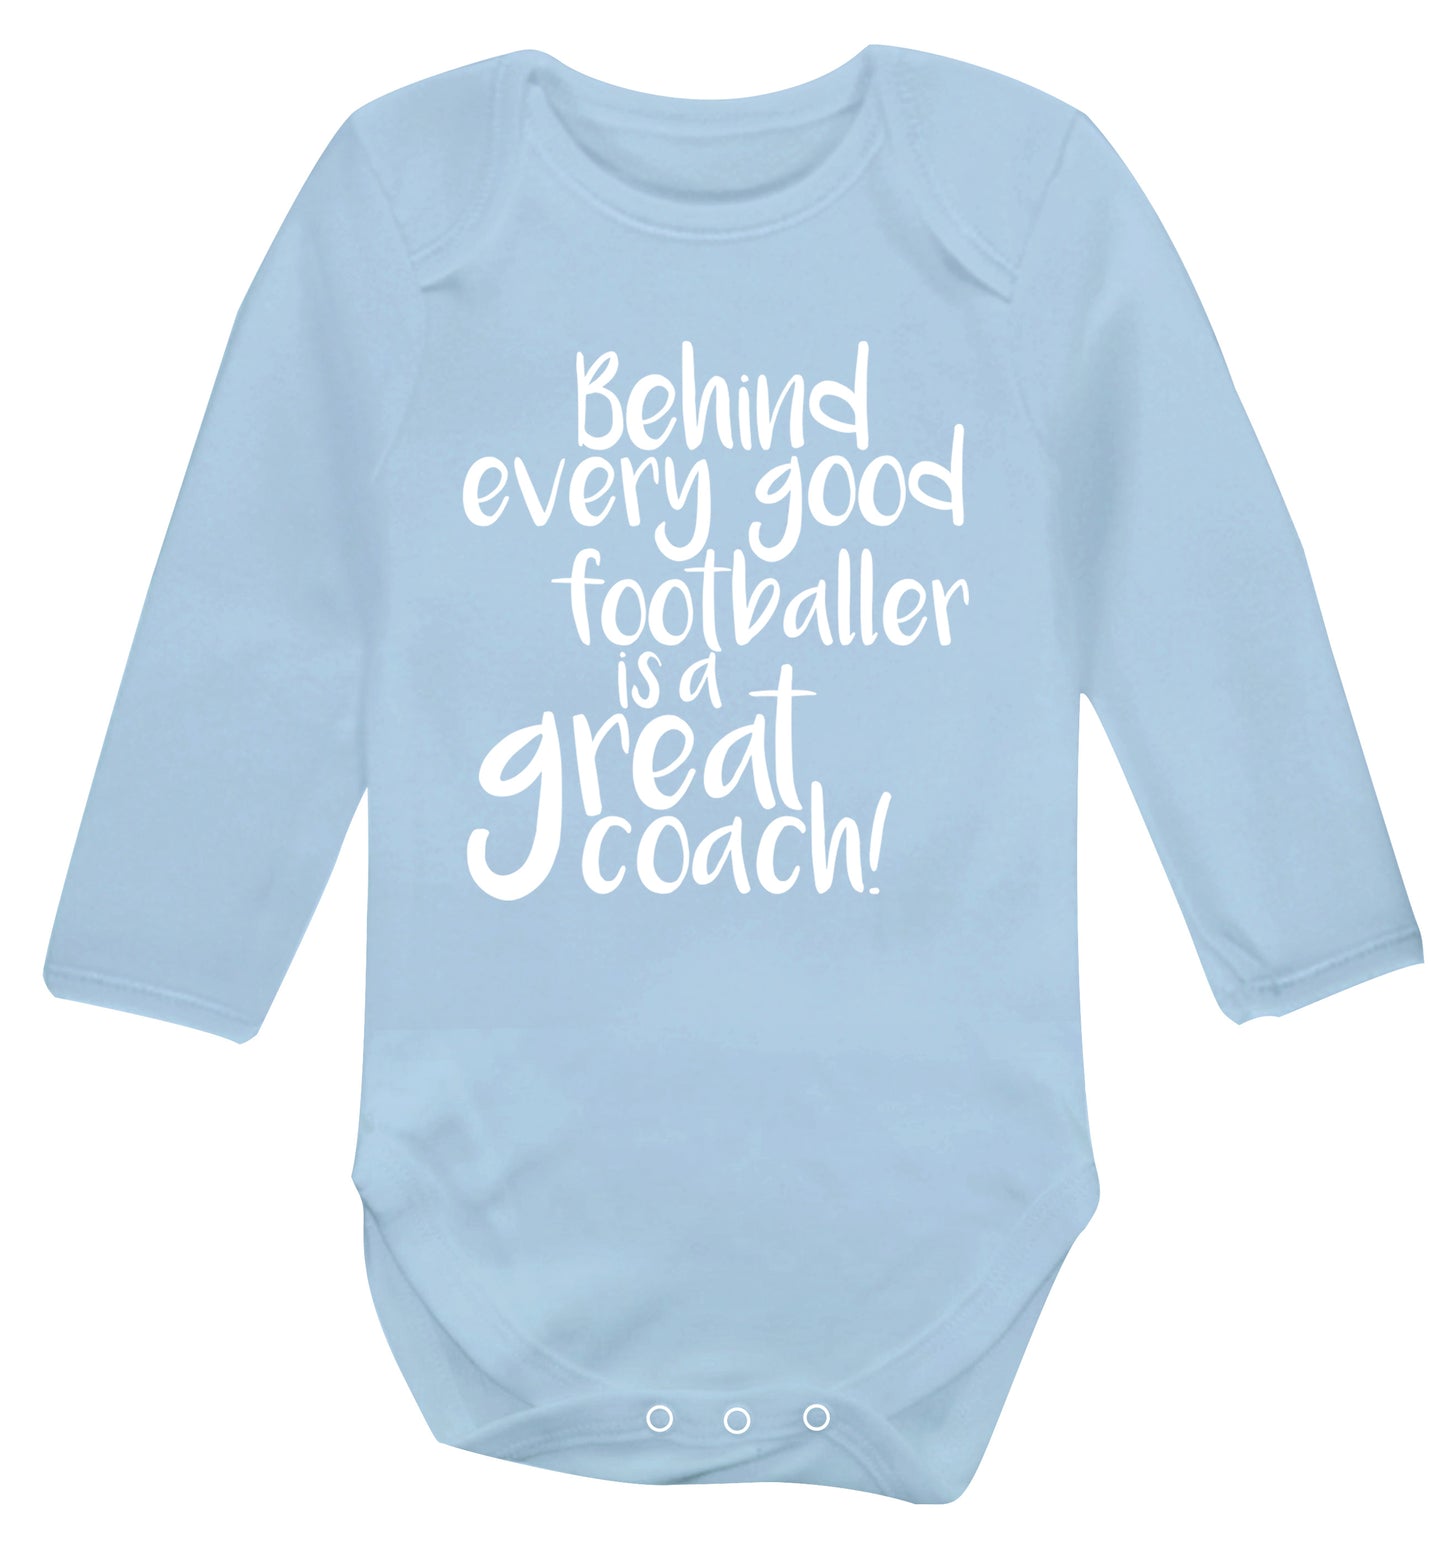 Behind every good footballer is a great coach! Baby Vest long sleeved pale blue 6-12 months